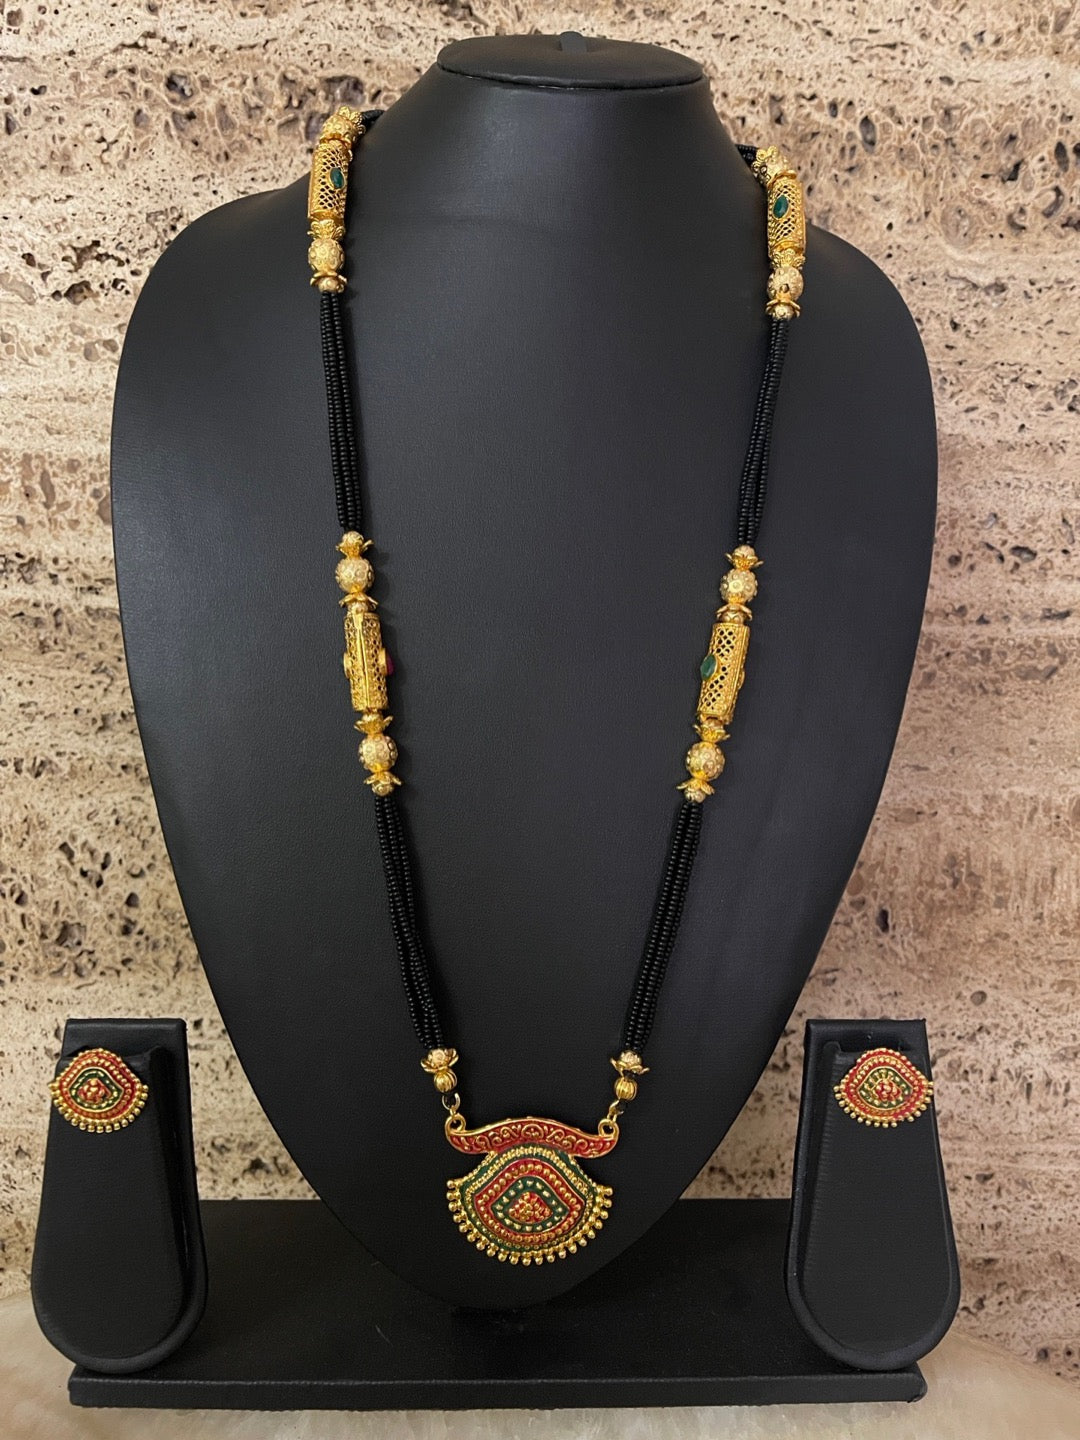 Long Mangalsutra Designs | Gold Mangalsutra Set With Earrings ...